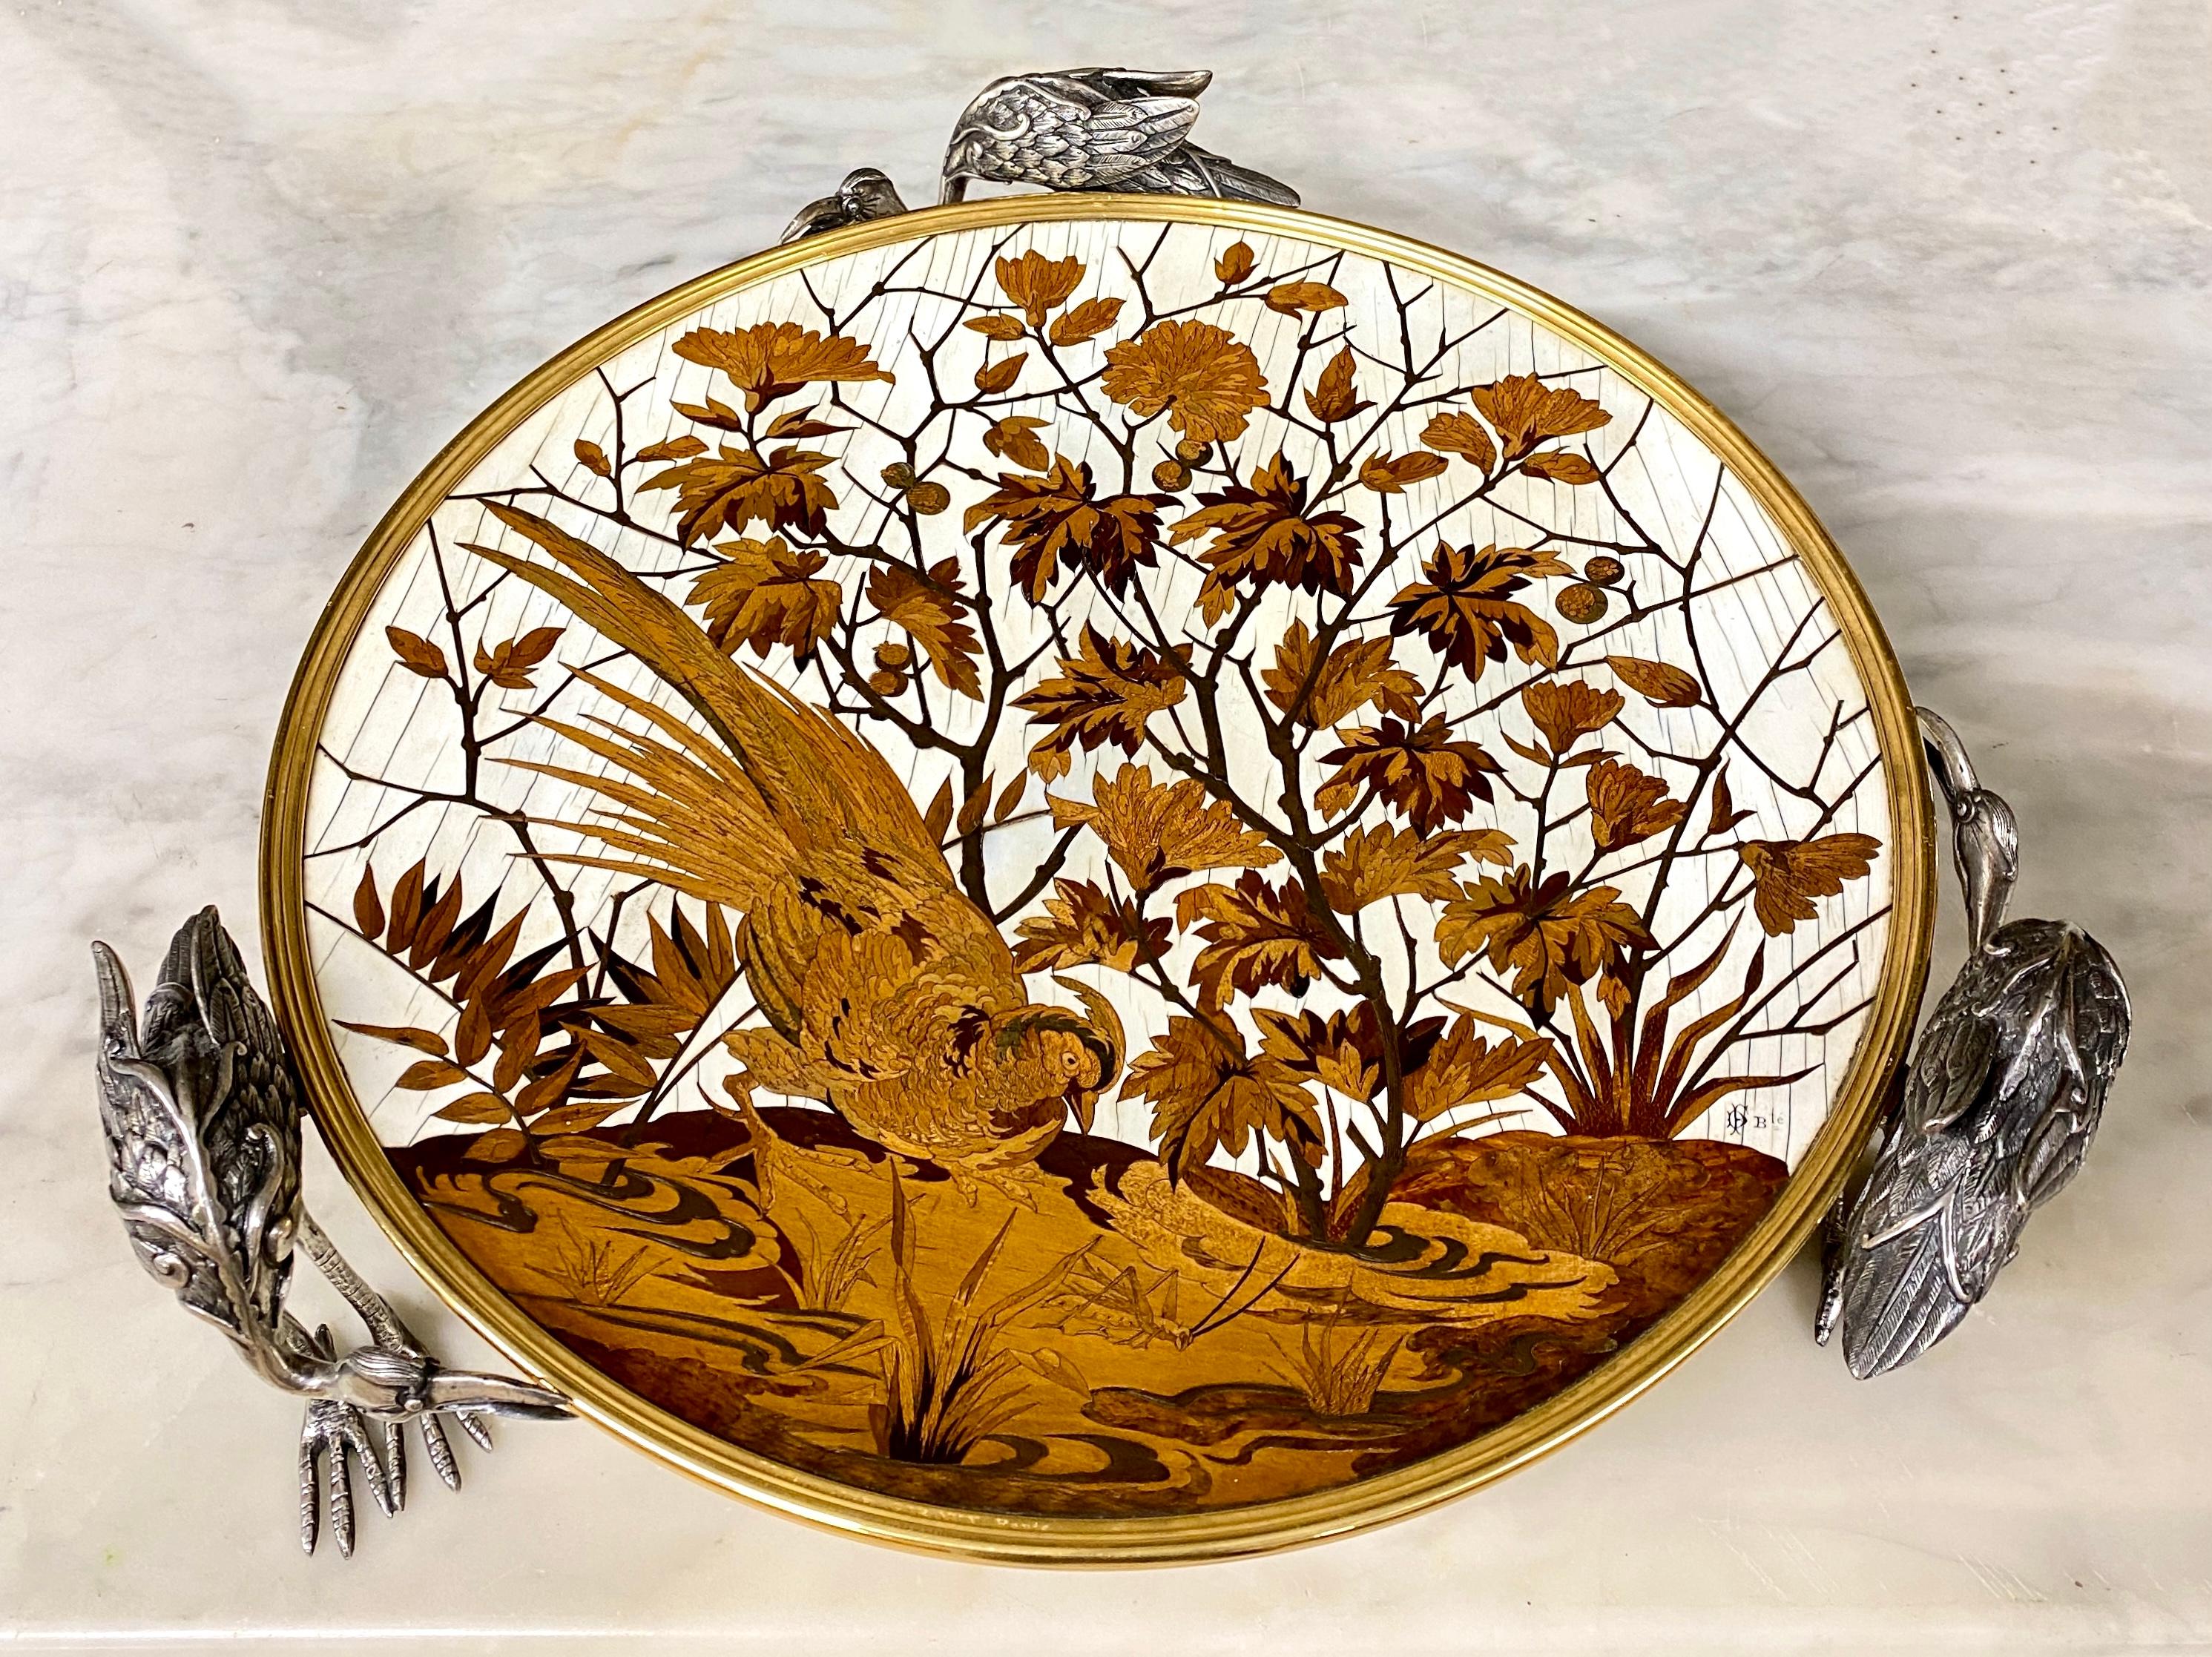 Alphonse Giroux and Duvinage, Japanese Bowl with Storks in Marquetry Cloisonné For Sale 5